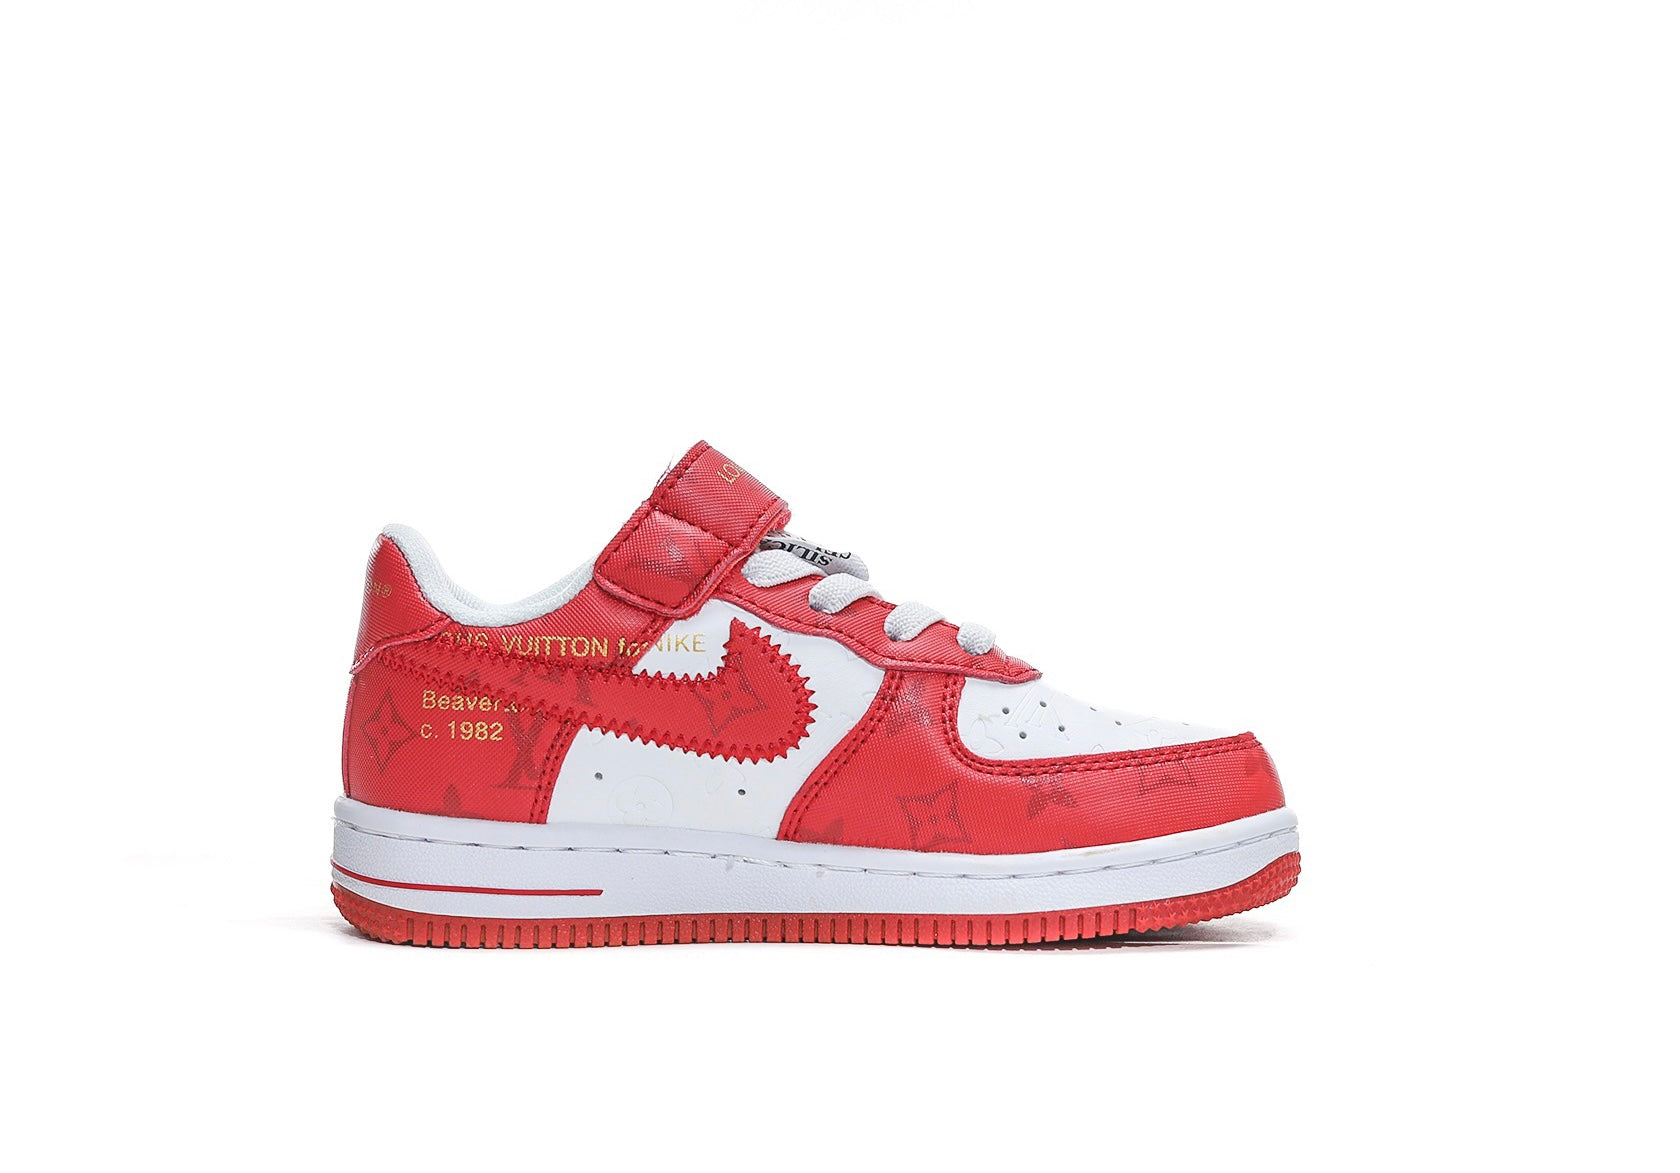 Louis vuitton nike Air Force 1 red shoes